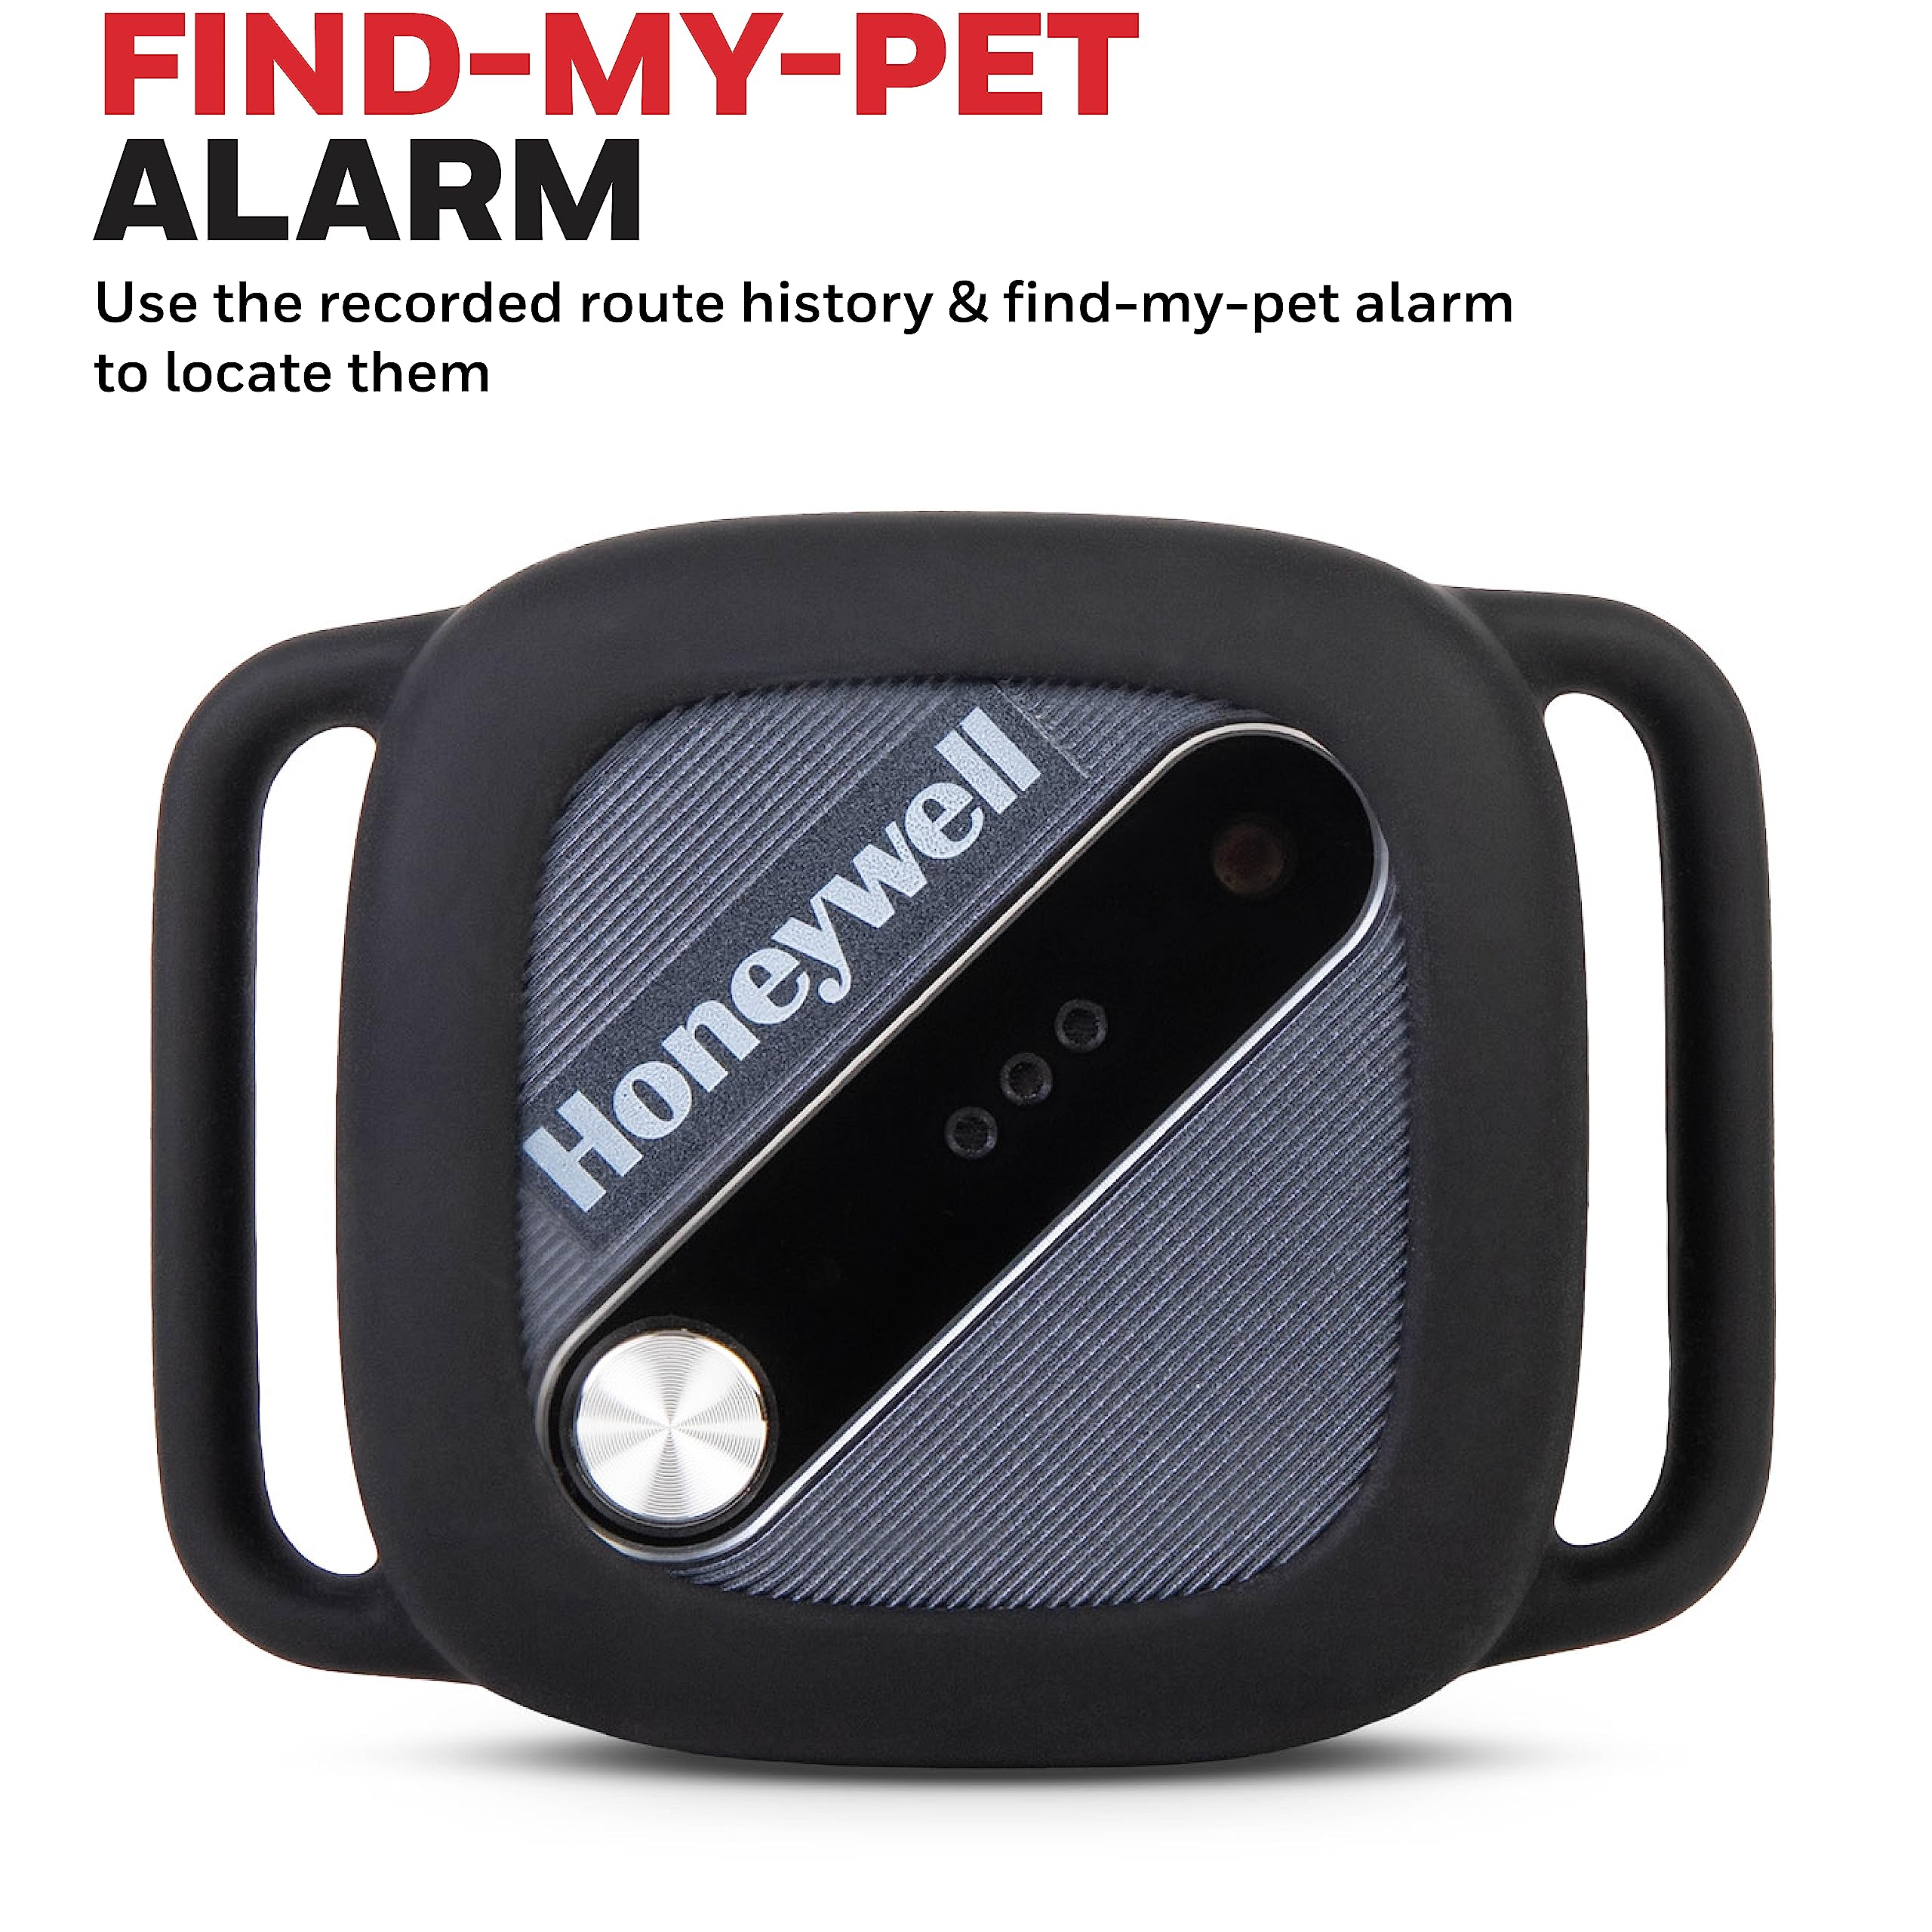 Honeywell Pet Activity Tracker with GPS for Dogs, Blue- Use Your Collar or Included One-Size-Fits-All Collar- Geo-Fencing, Find-My-Pet Alarm, and Review History- Perfect Dog Fitness Tracker